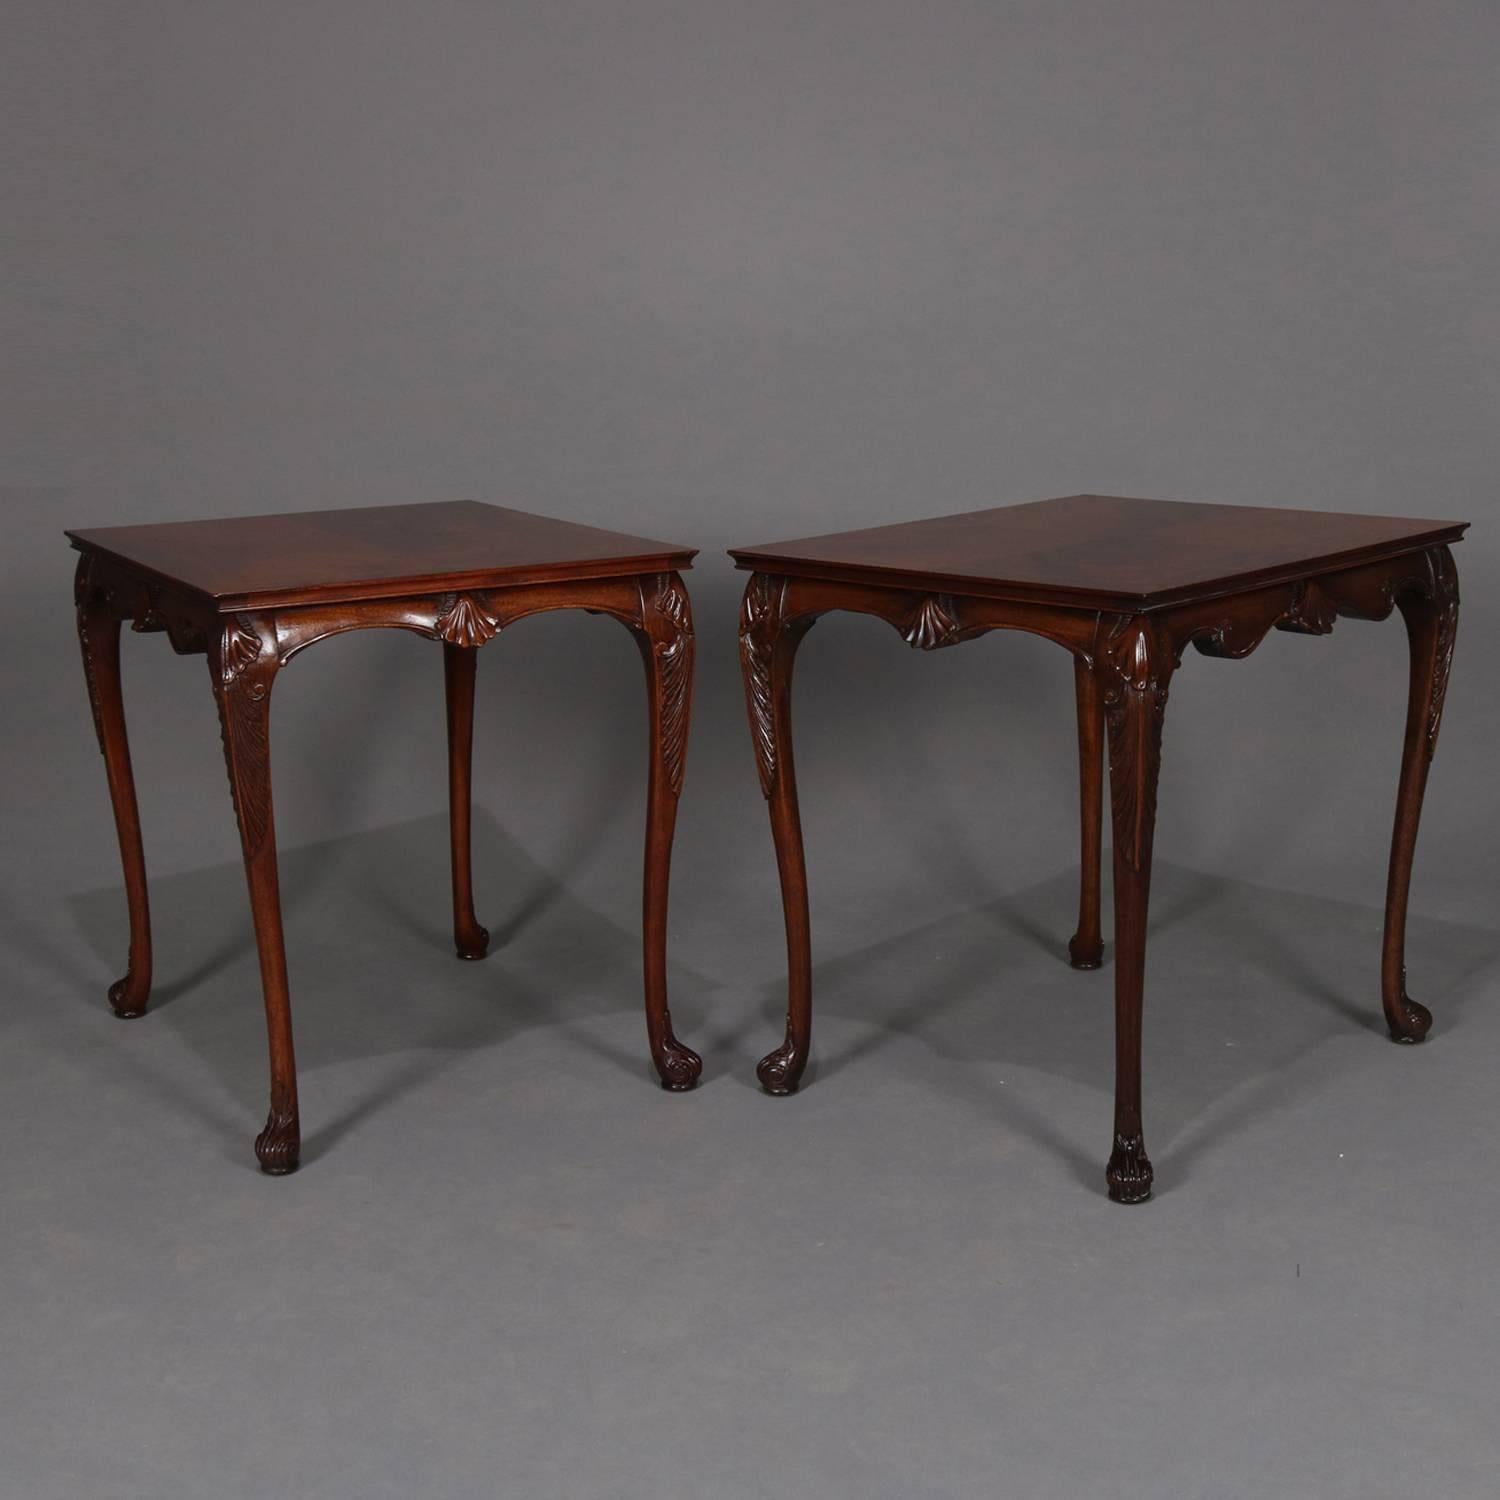 Pair of Baker School carved flame mahogany end table feature bookmatched tops with scalloped skirt having central shell and raised on cabriole legs with acanthus knees and scroll form feet, circa 1930.

Measures: 25.5